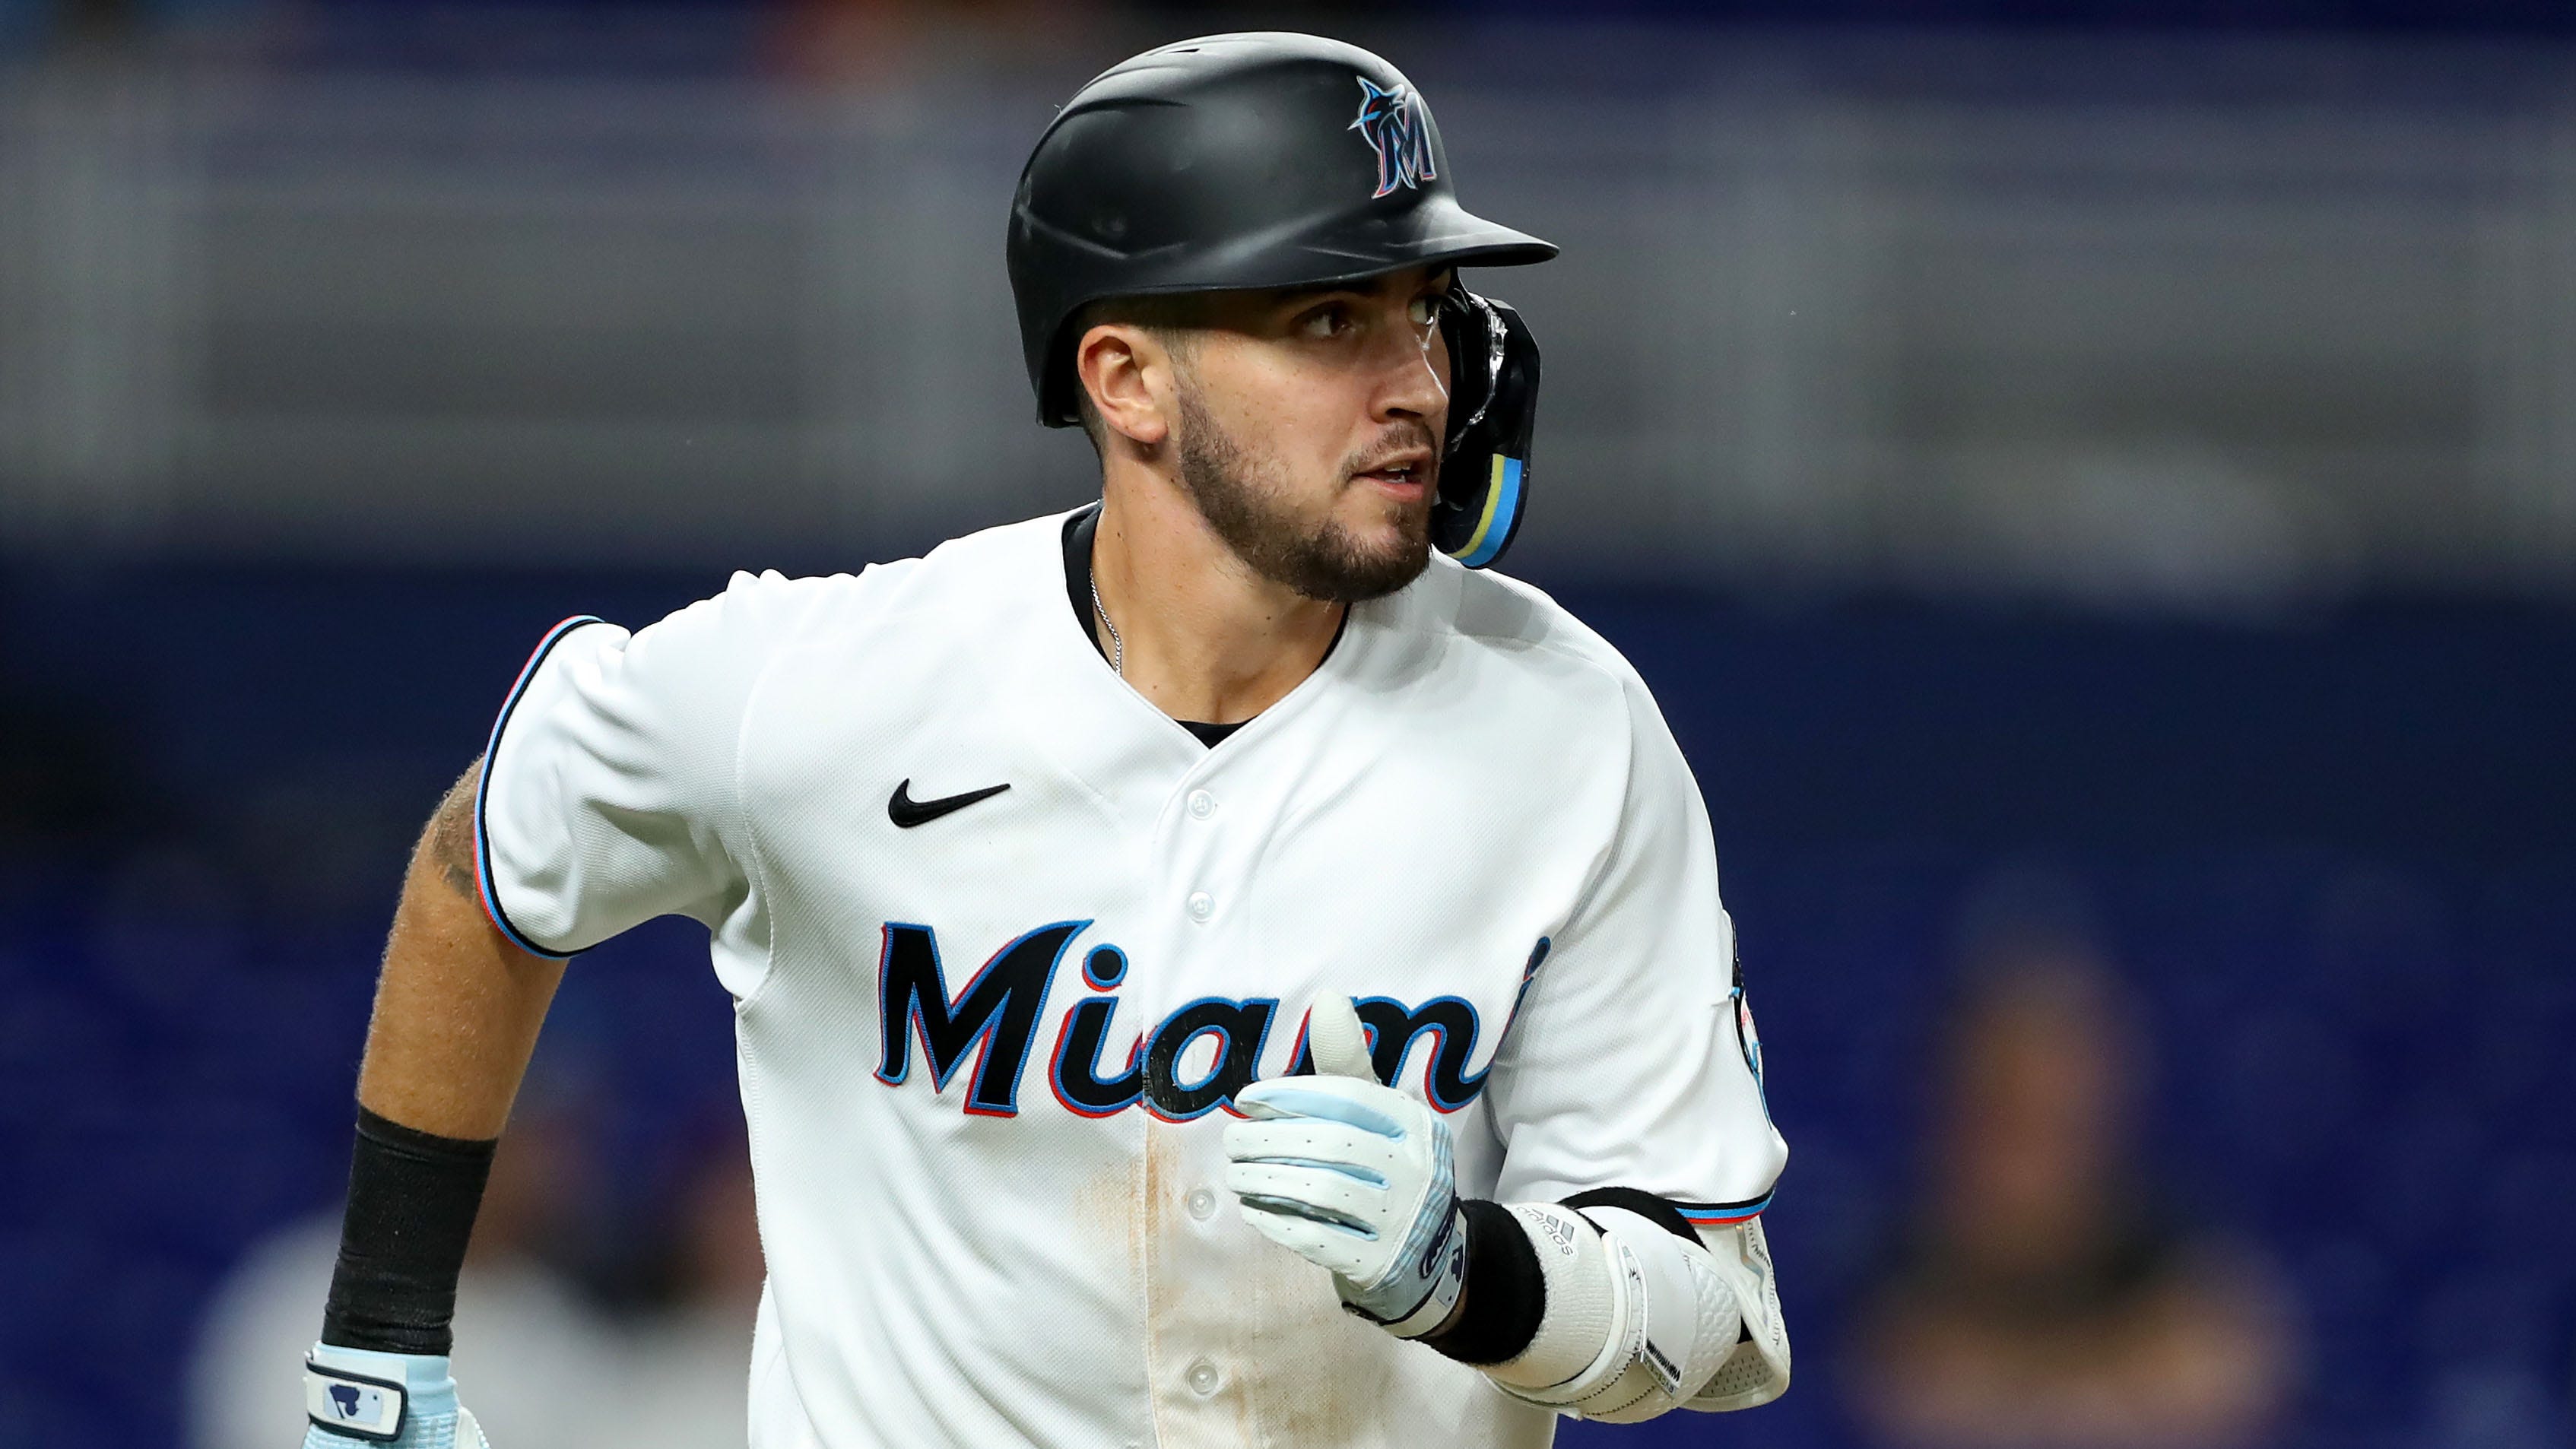 Brother of Marlins rookie has rambunctious celebration after first home run